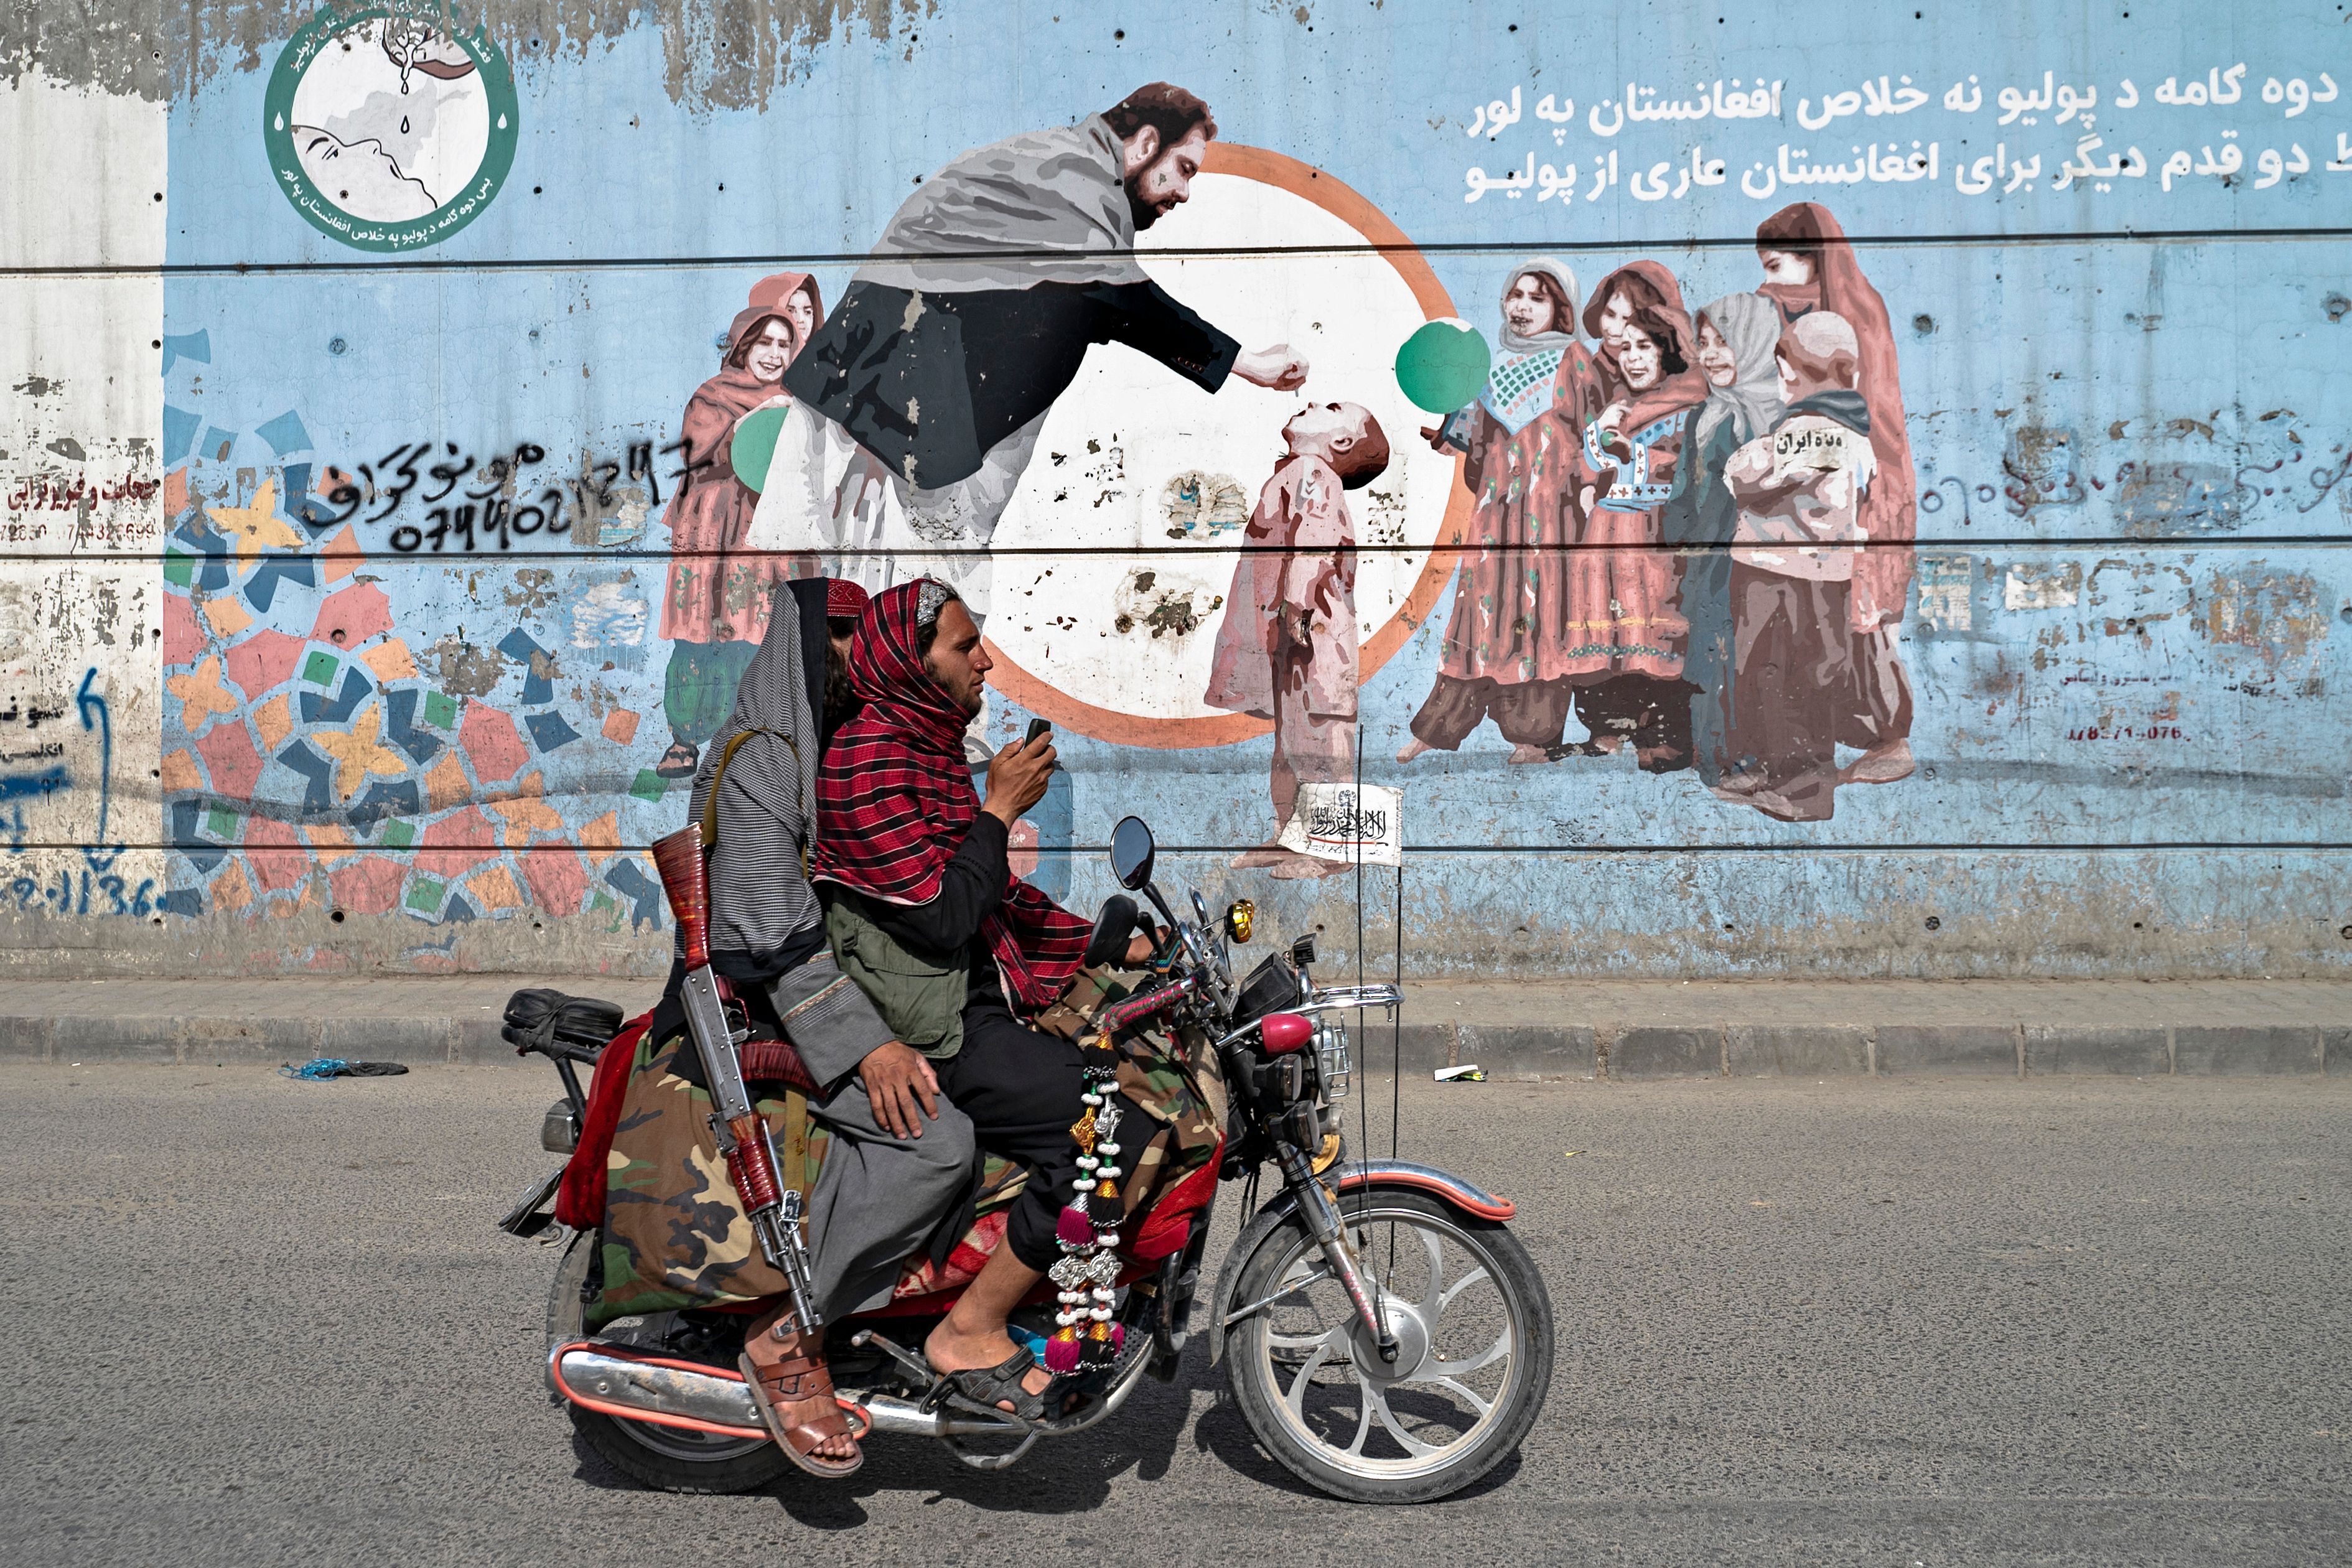 Taliban security personnel ride a motorcycle past a mural depicting polio vaccination campaign in Kabul